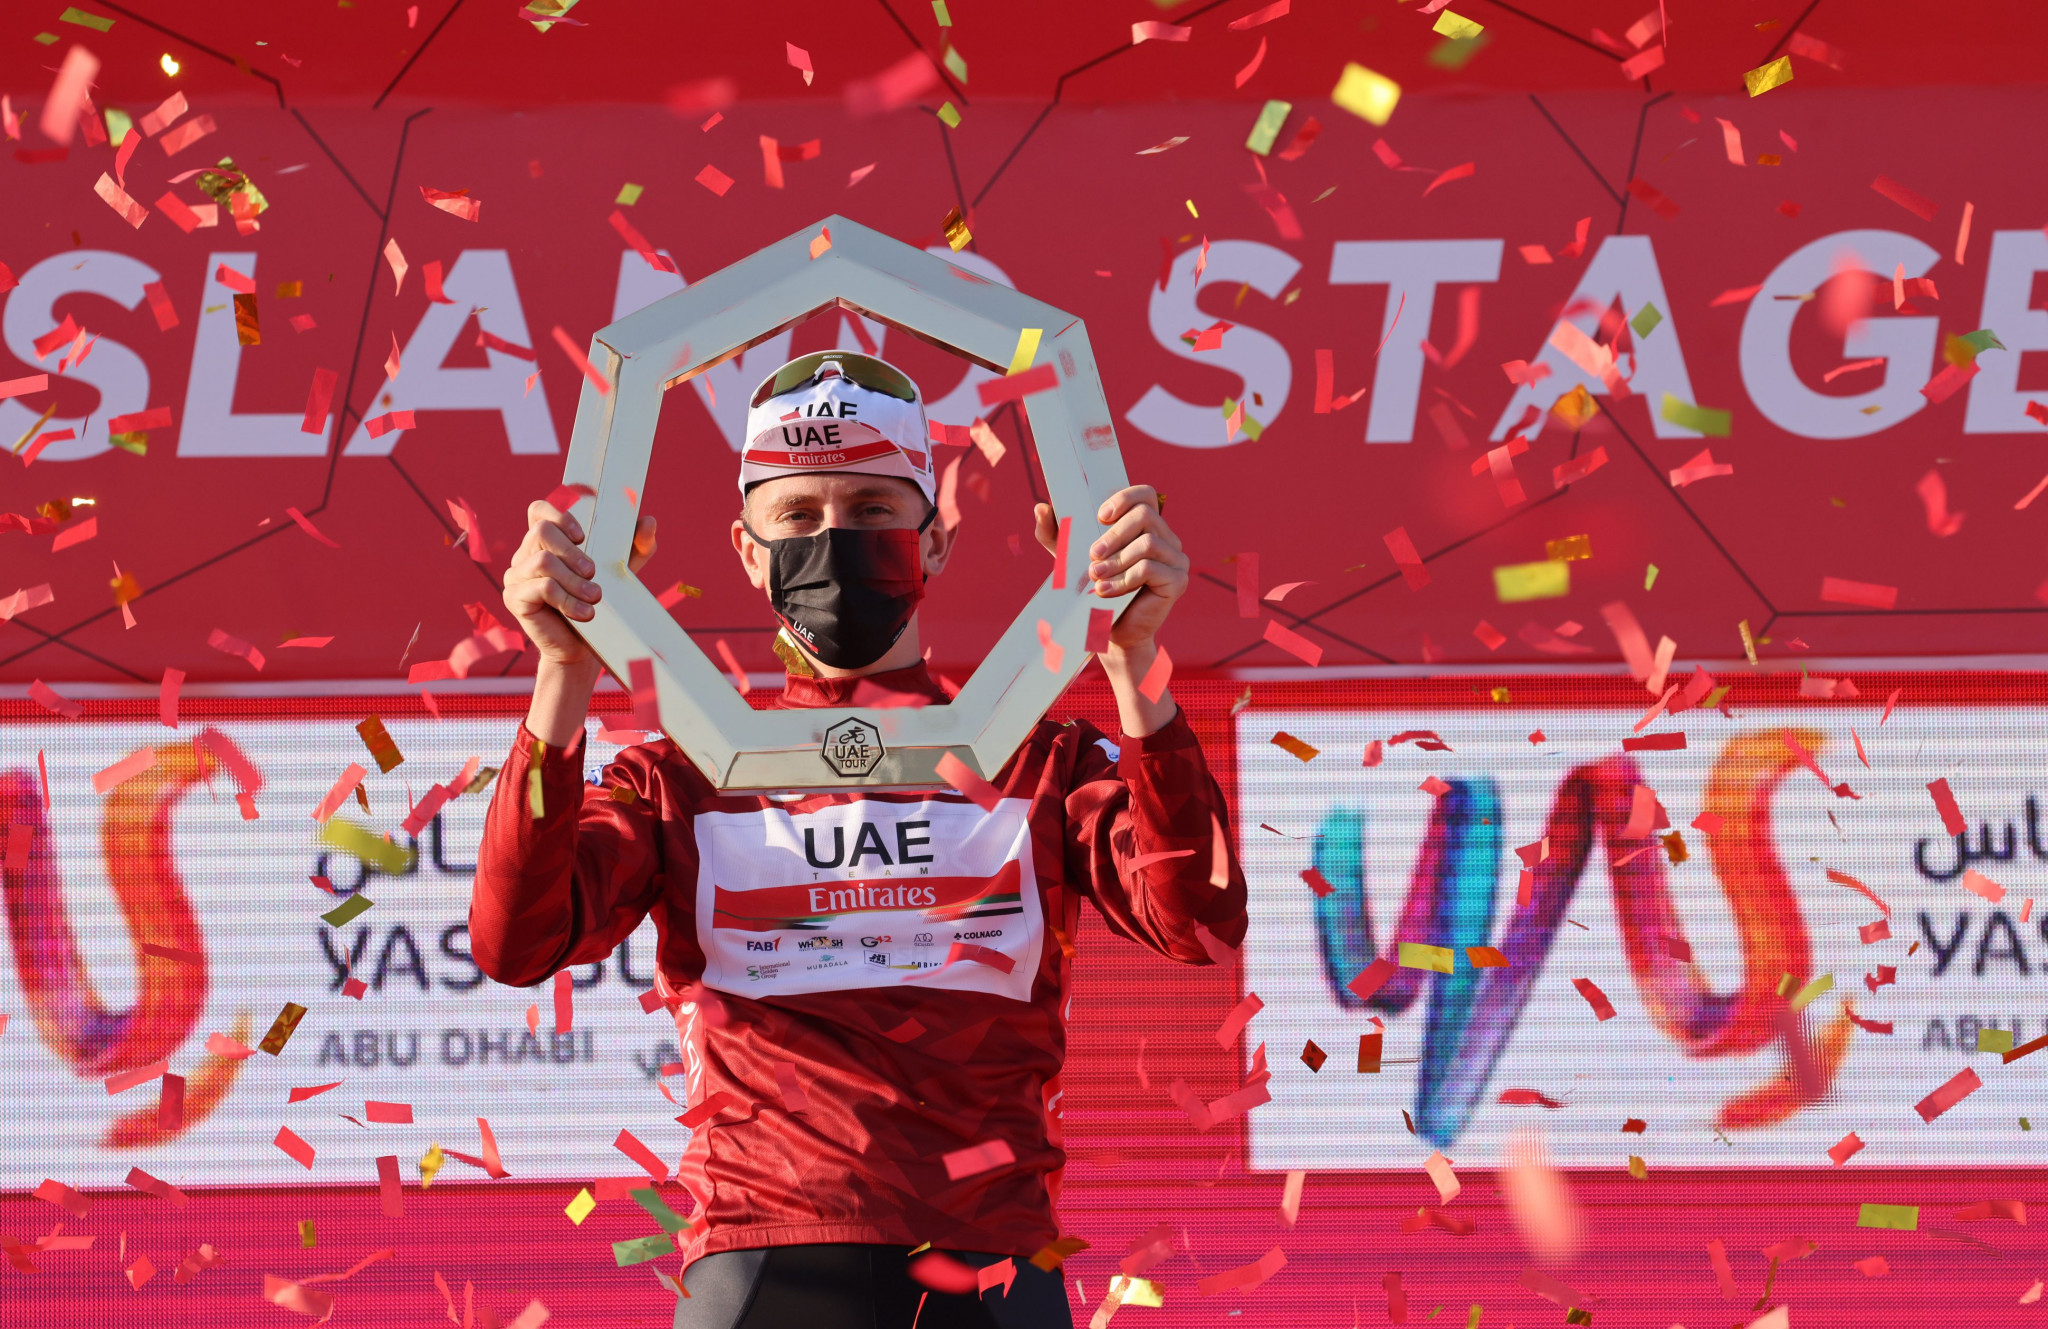 Tadej Pogačar secured the overall victory at the UAE Tour ©Getty Images